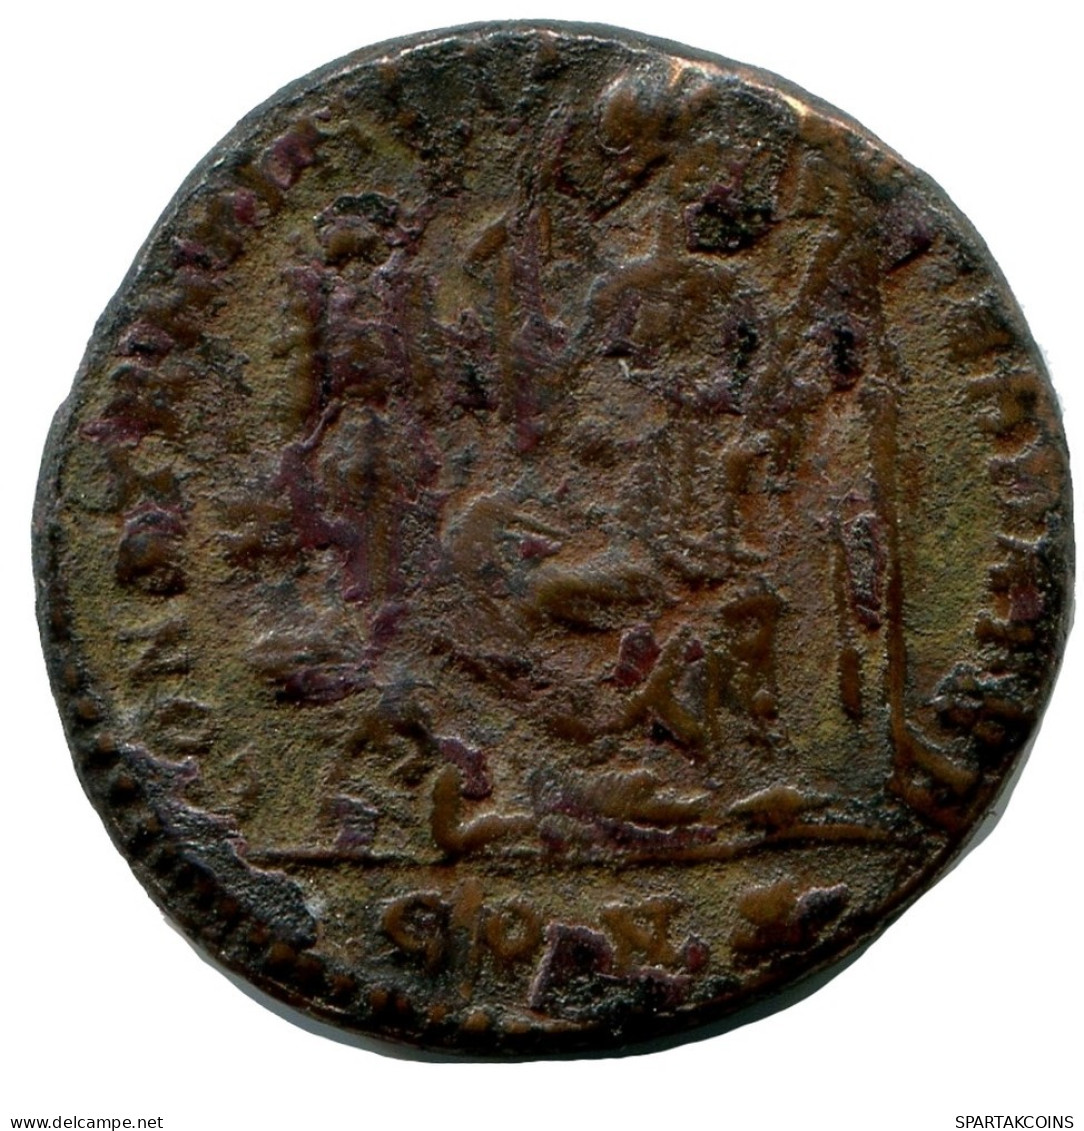 CONSTANTINE I MINTED IN CONSTANTINOPLE FOUND IN IHNASYAH HOARD #ANC10816.14.D.A - El Imperio Christiano (307 / 363)